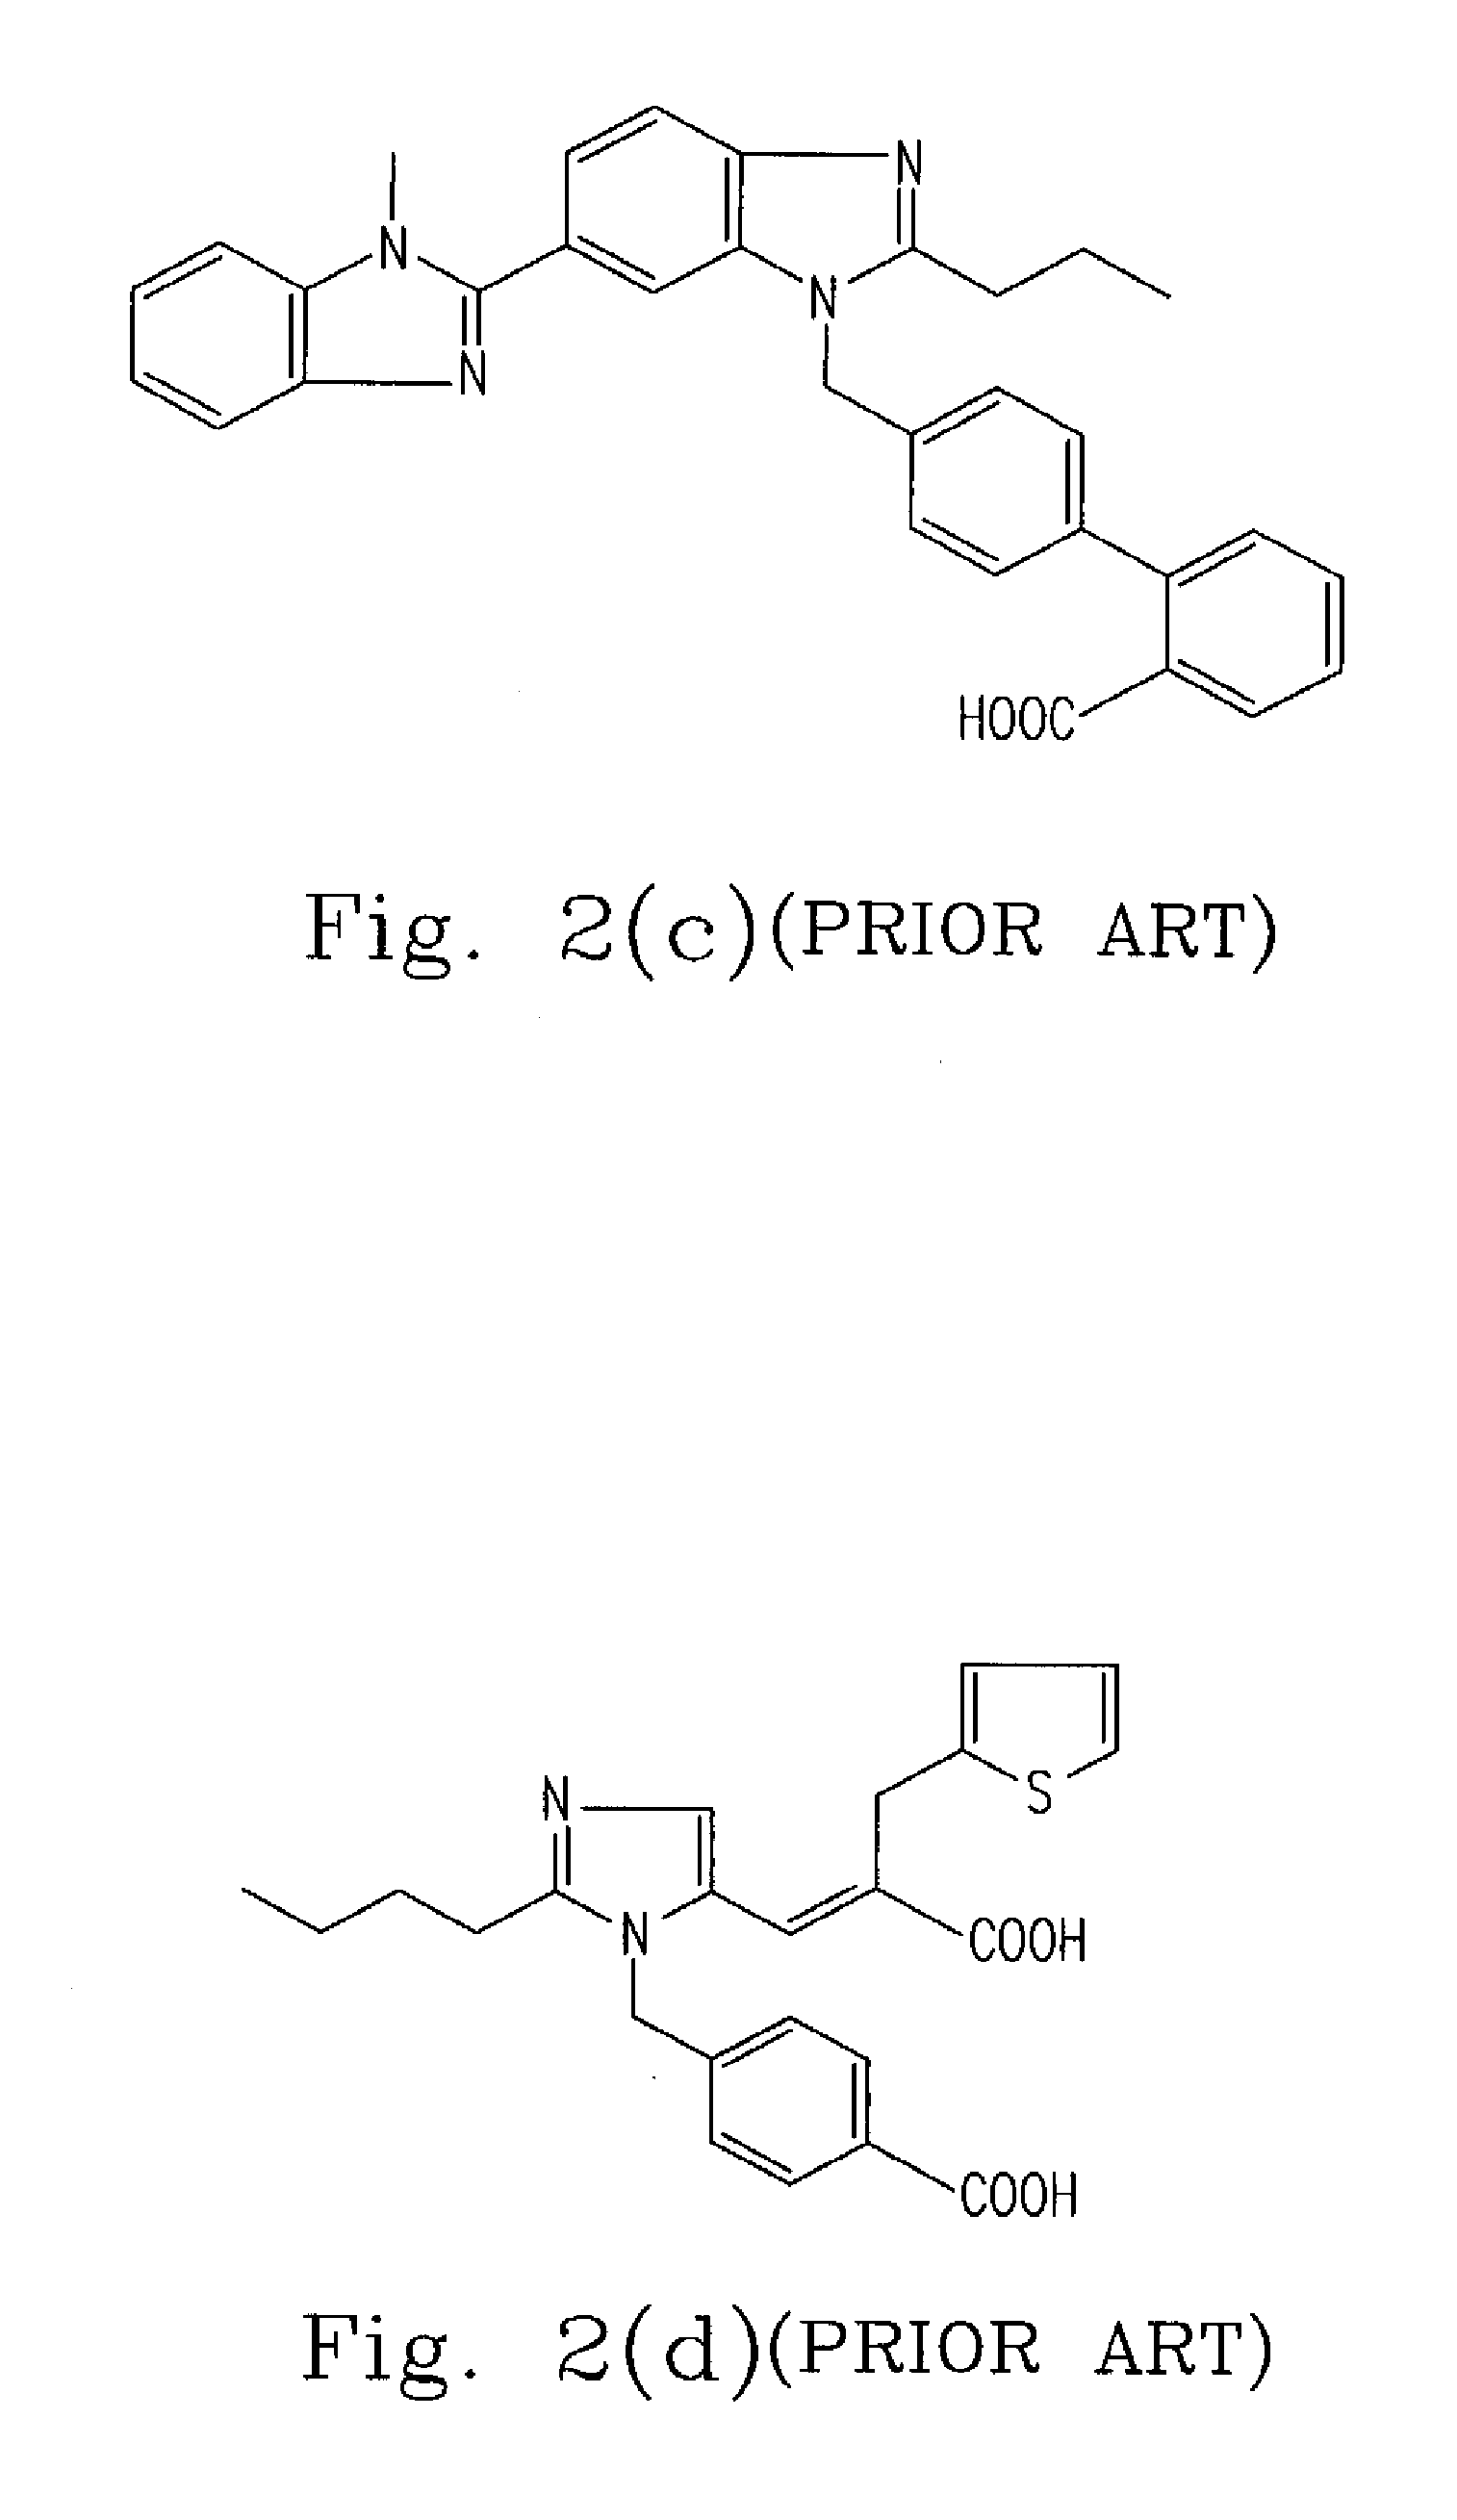 Lead compound of Anti-hypertensive drug and method for screening the same